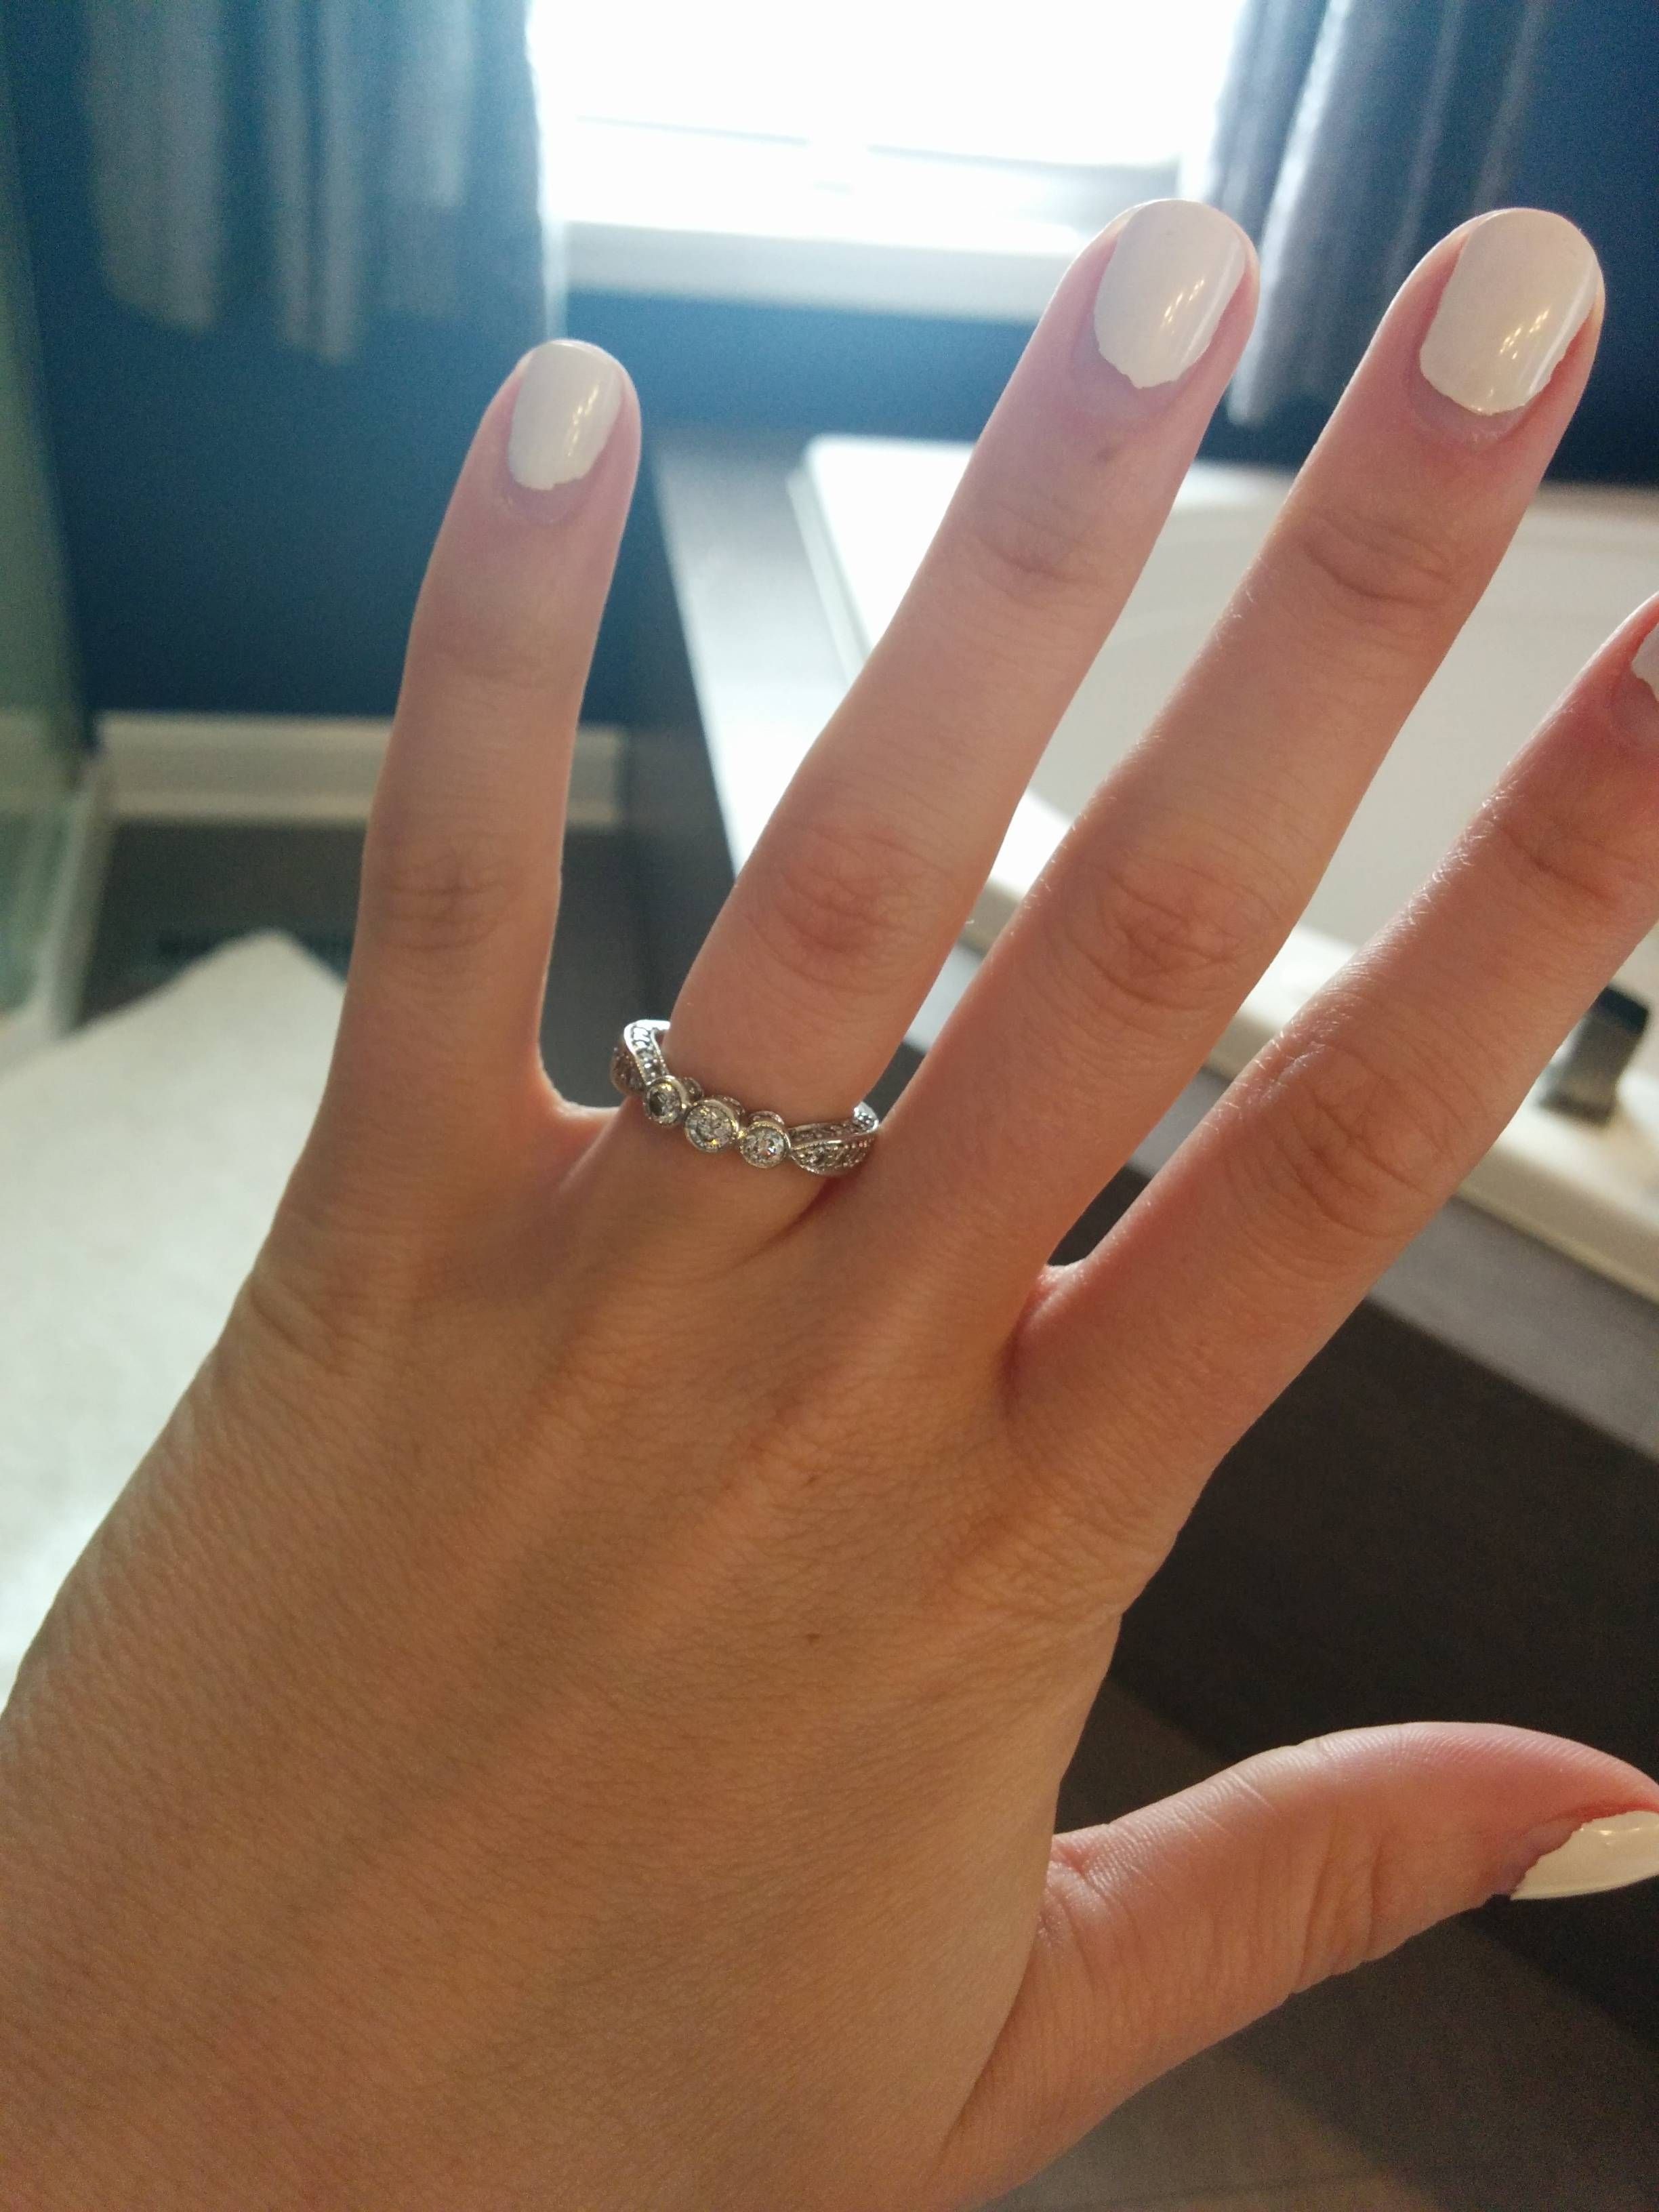 10th Anniversary Ring Upgrade Help! – Weddingbee Inside Most Current First Anniversary Rings (View 2 of 25)